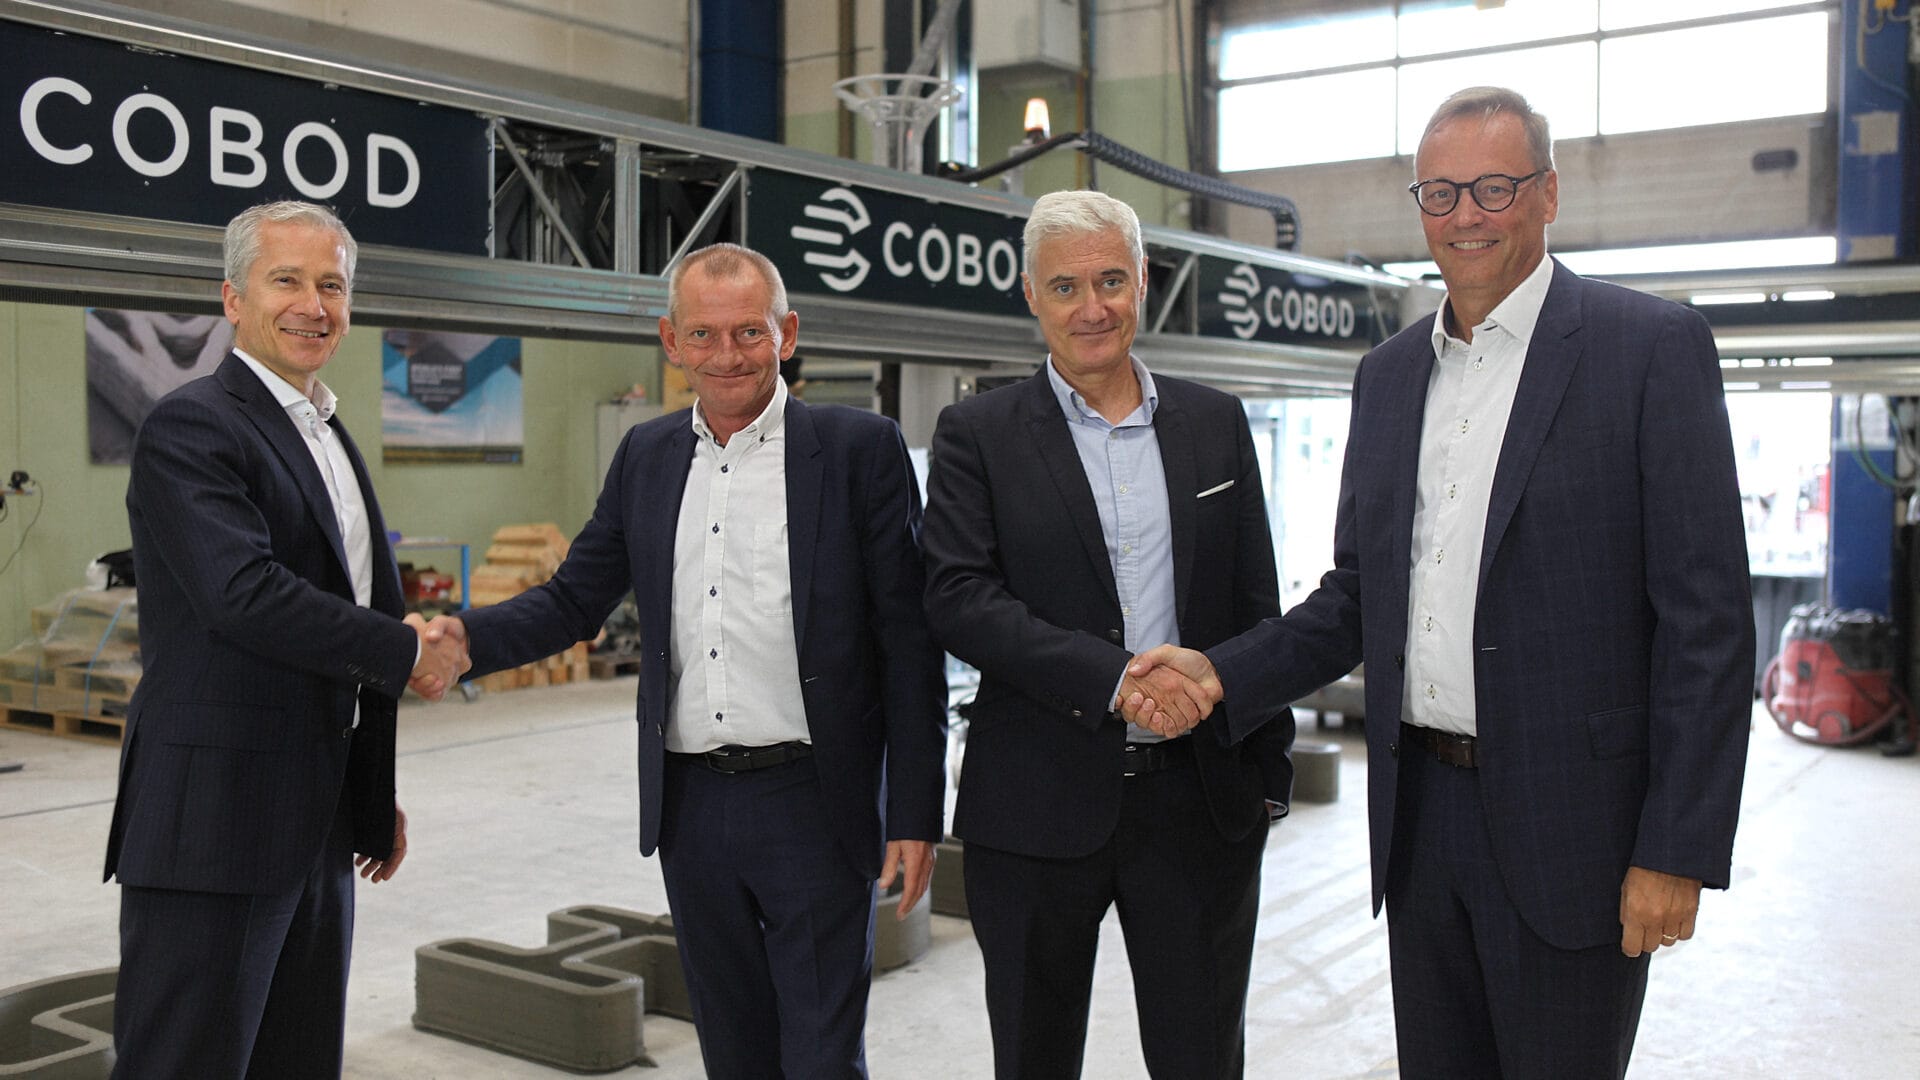 Executives from Holcim and COBOD shaking hands